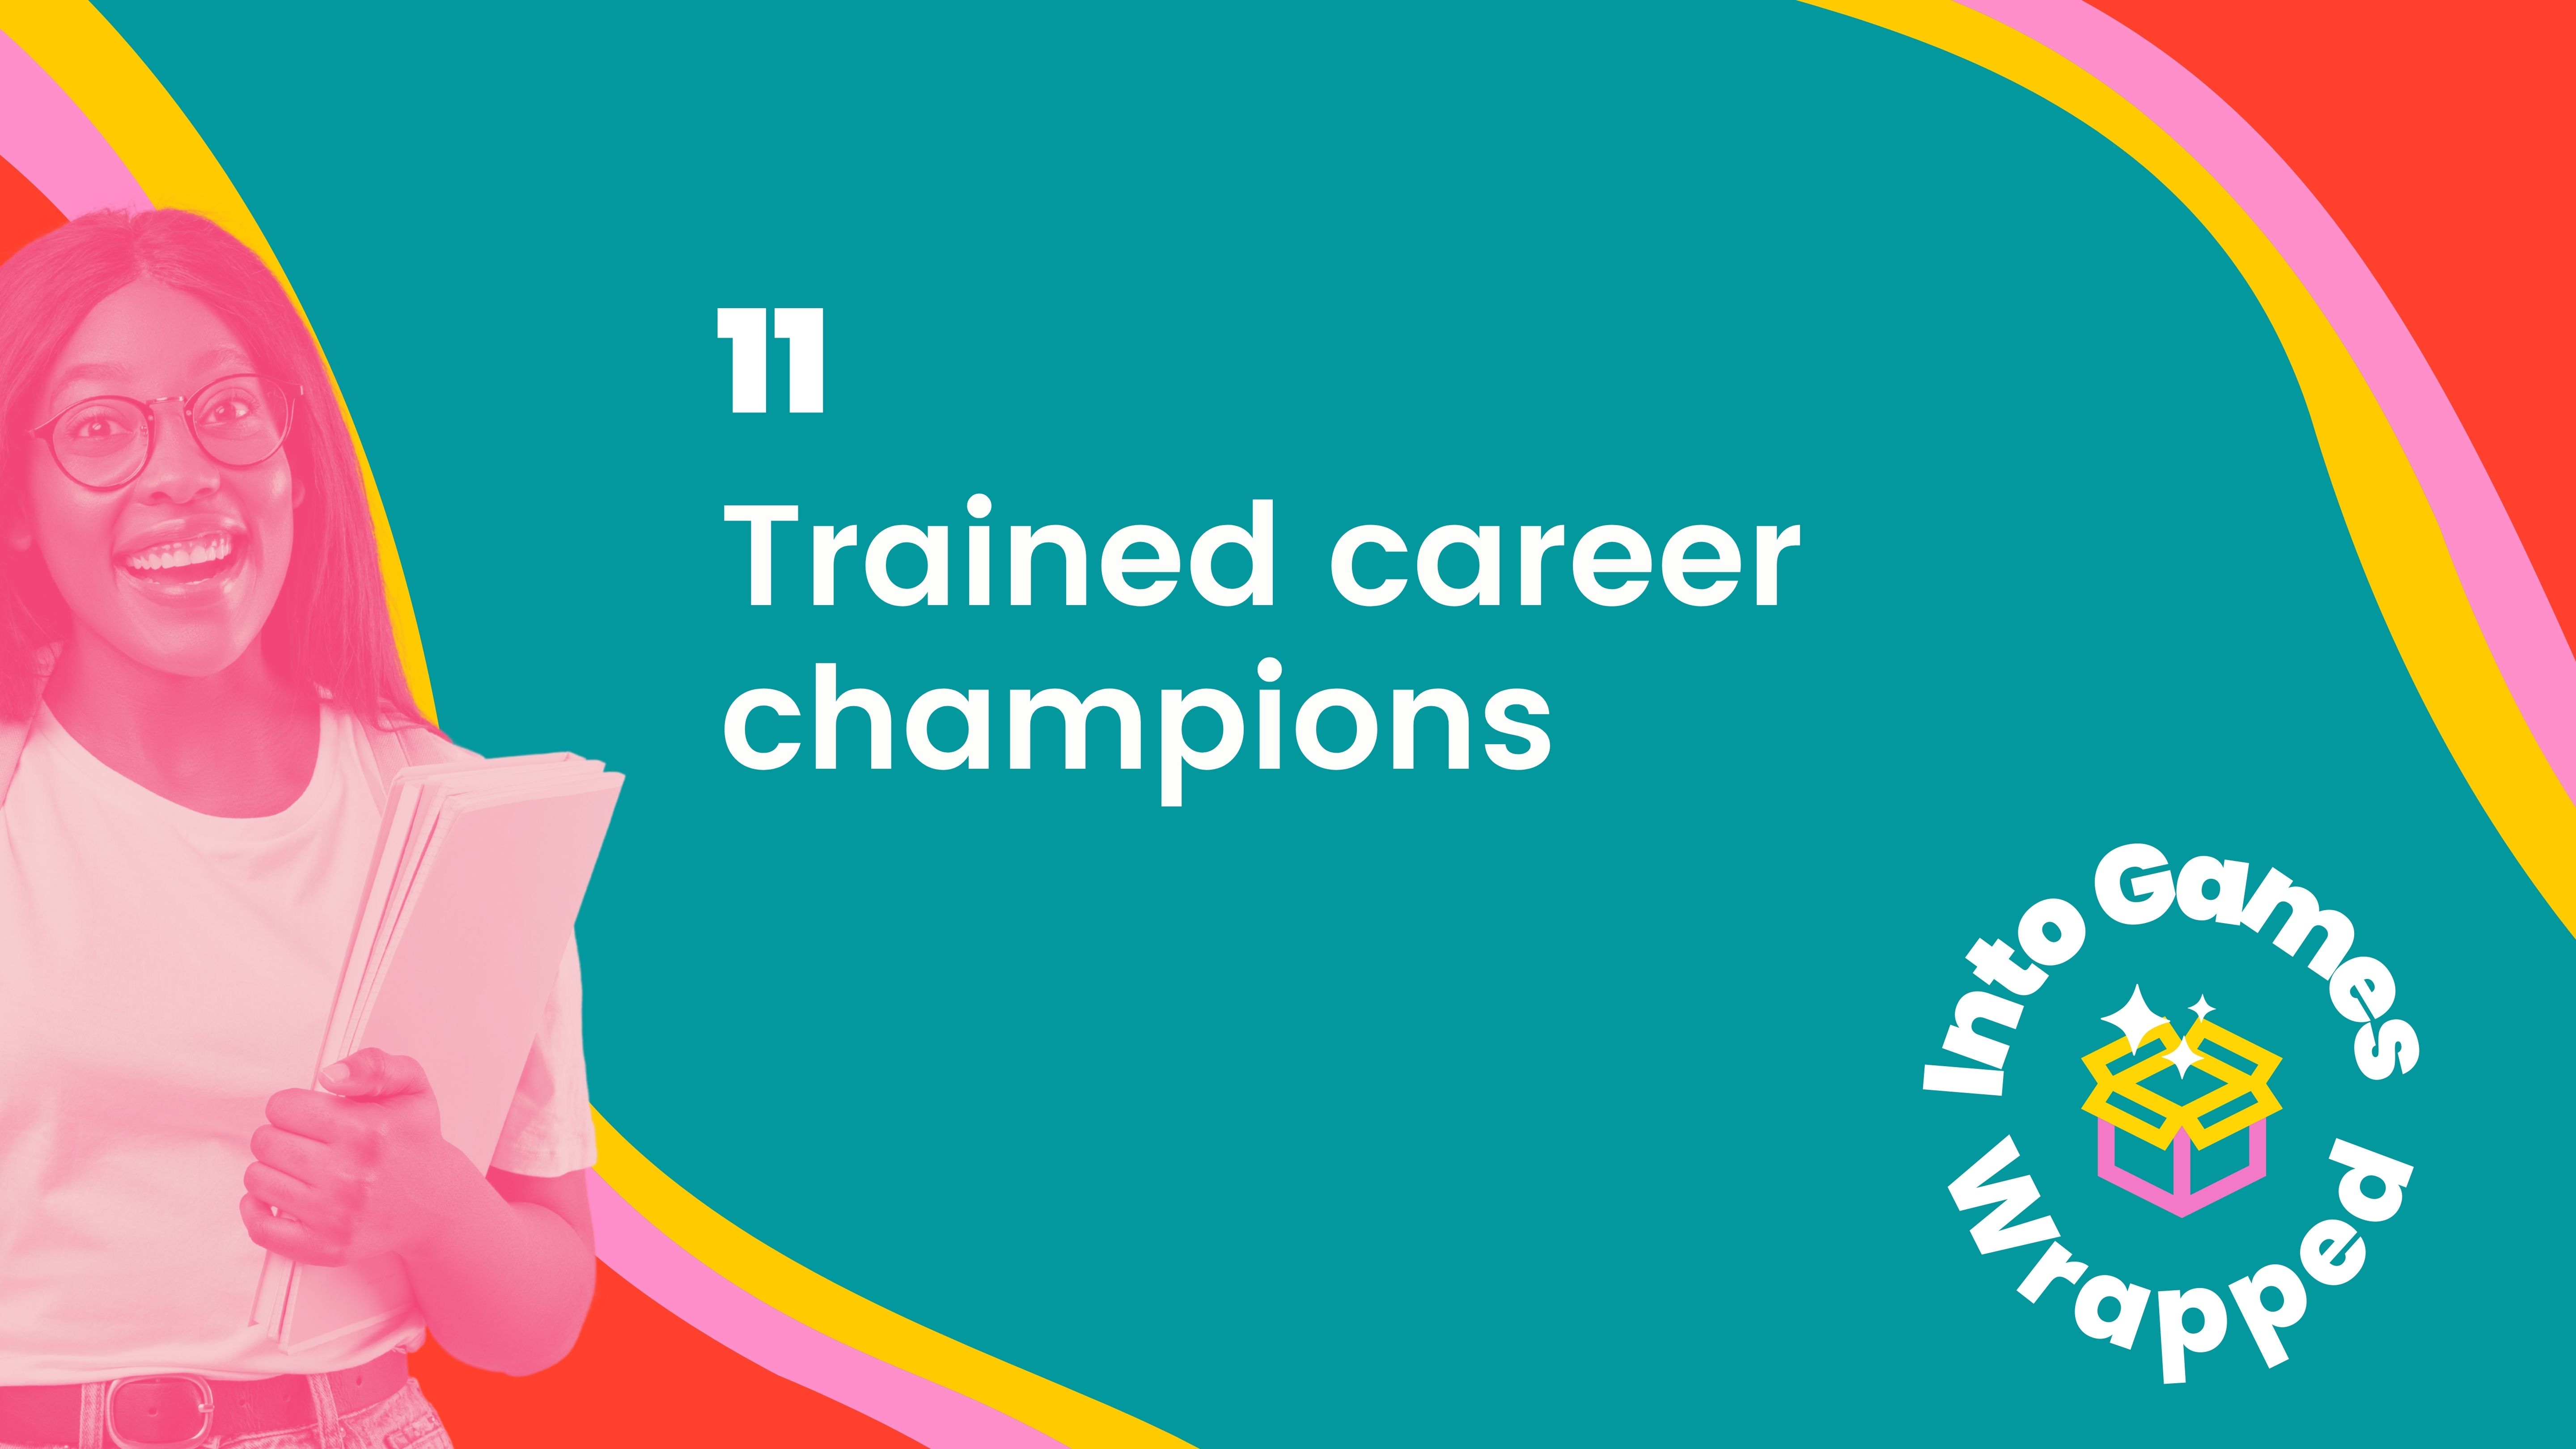 11 trained career champions